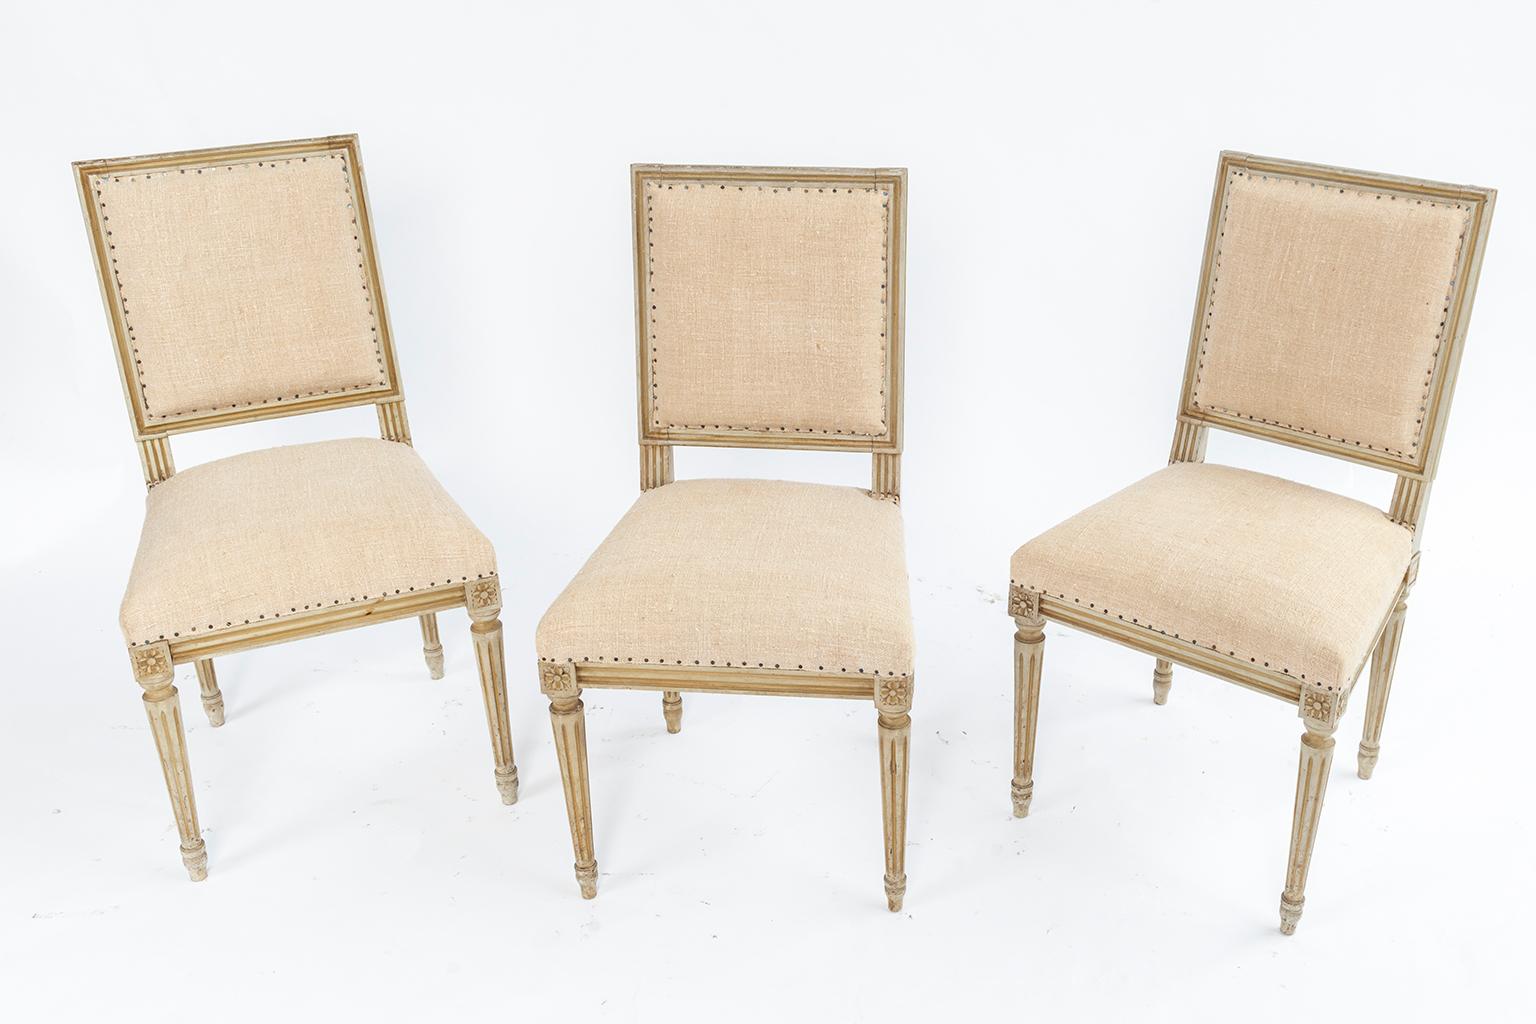 Set of six Louis XVI style square back dining chairs with star Rosettes.
Fluted and reeded legs. New French nailhead upholstery.